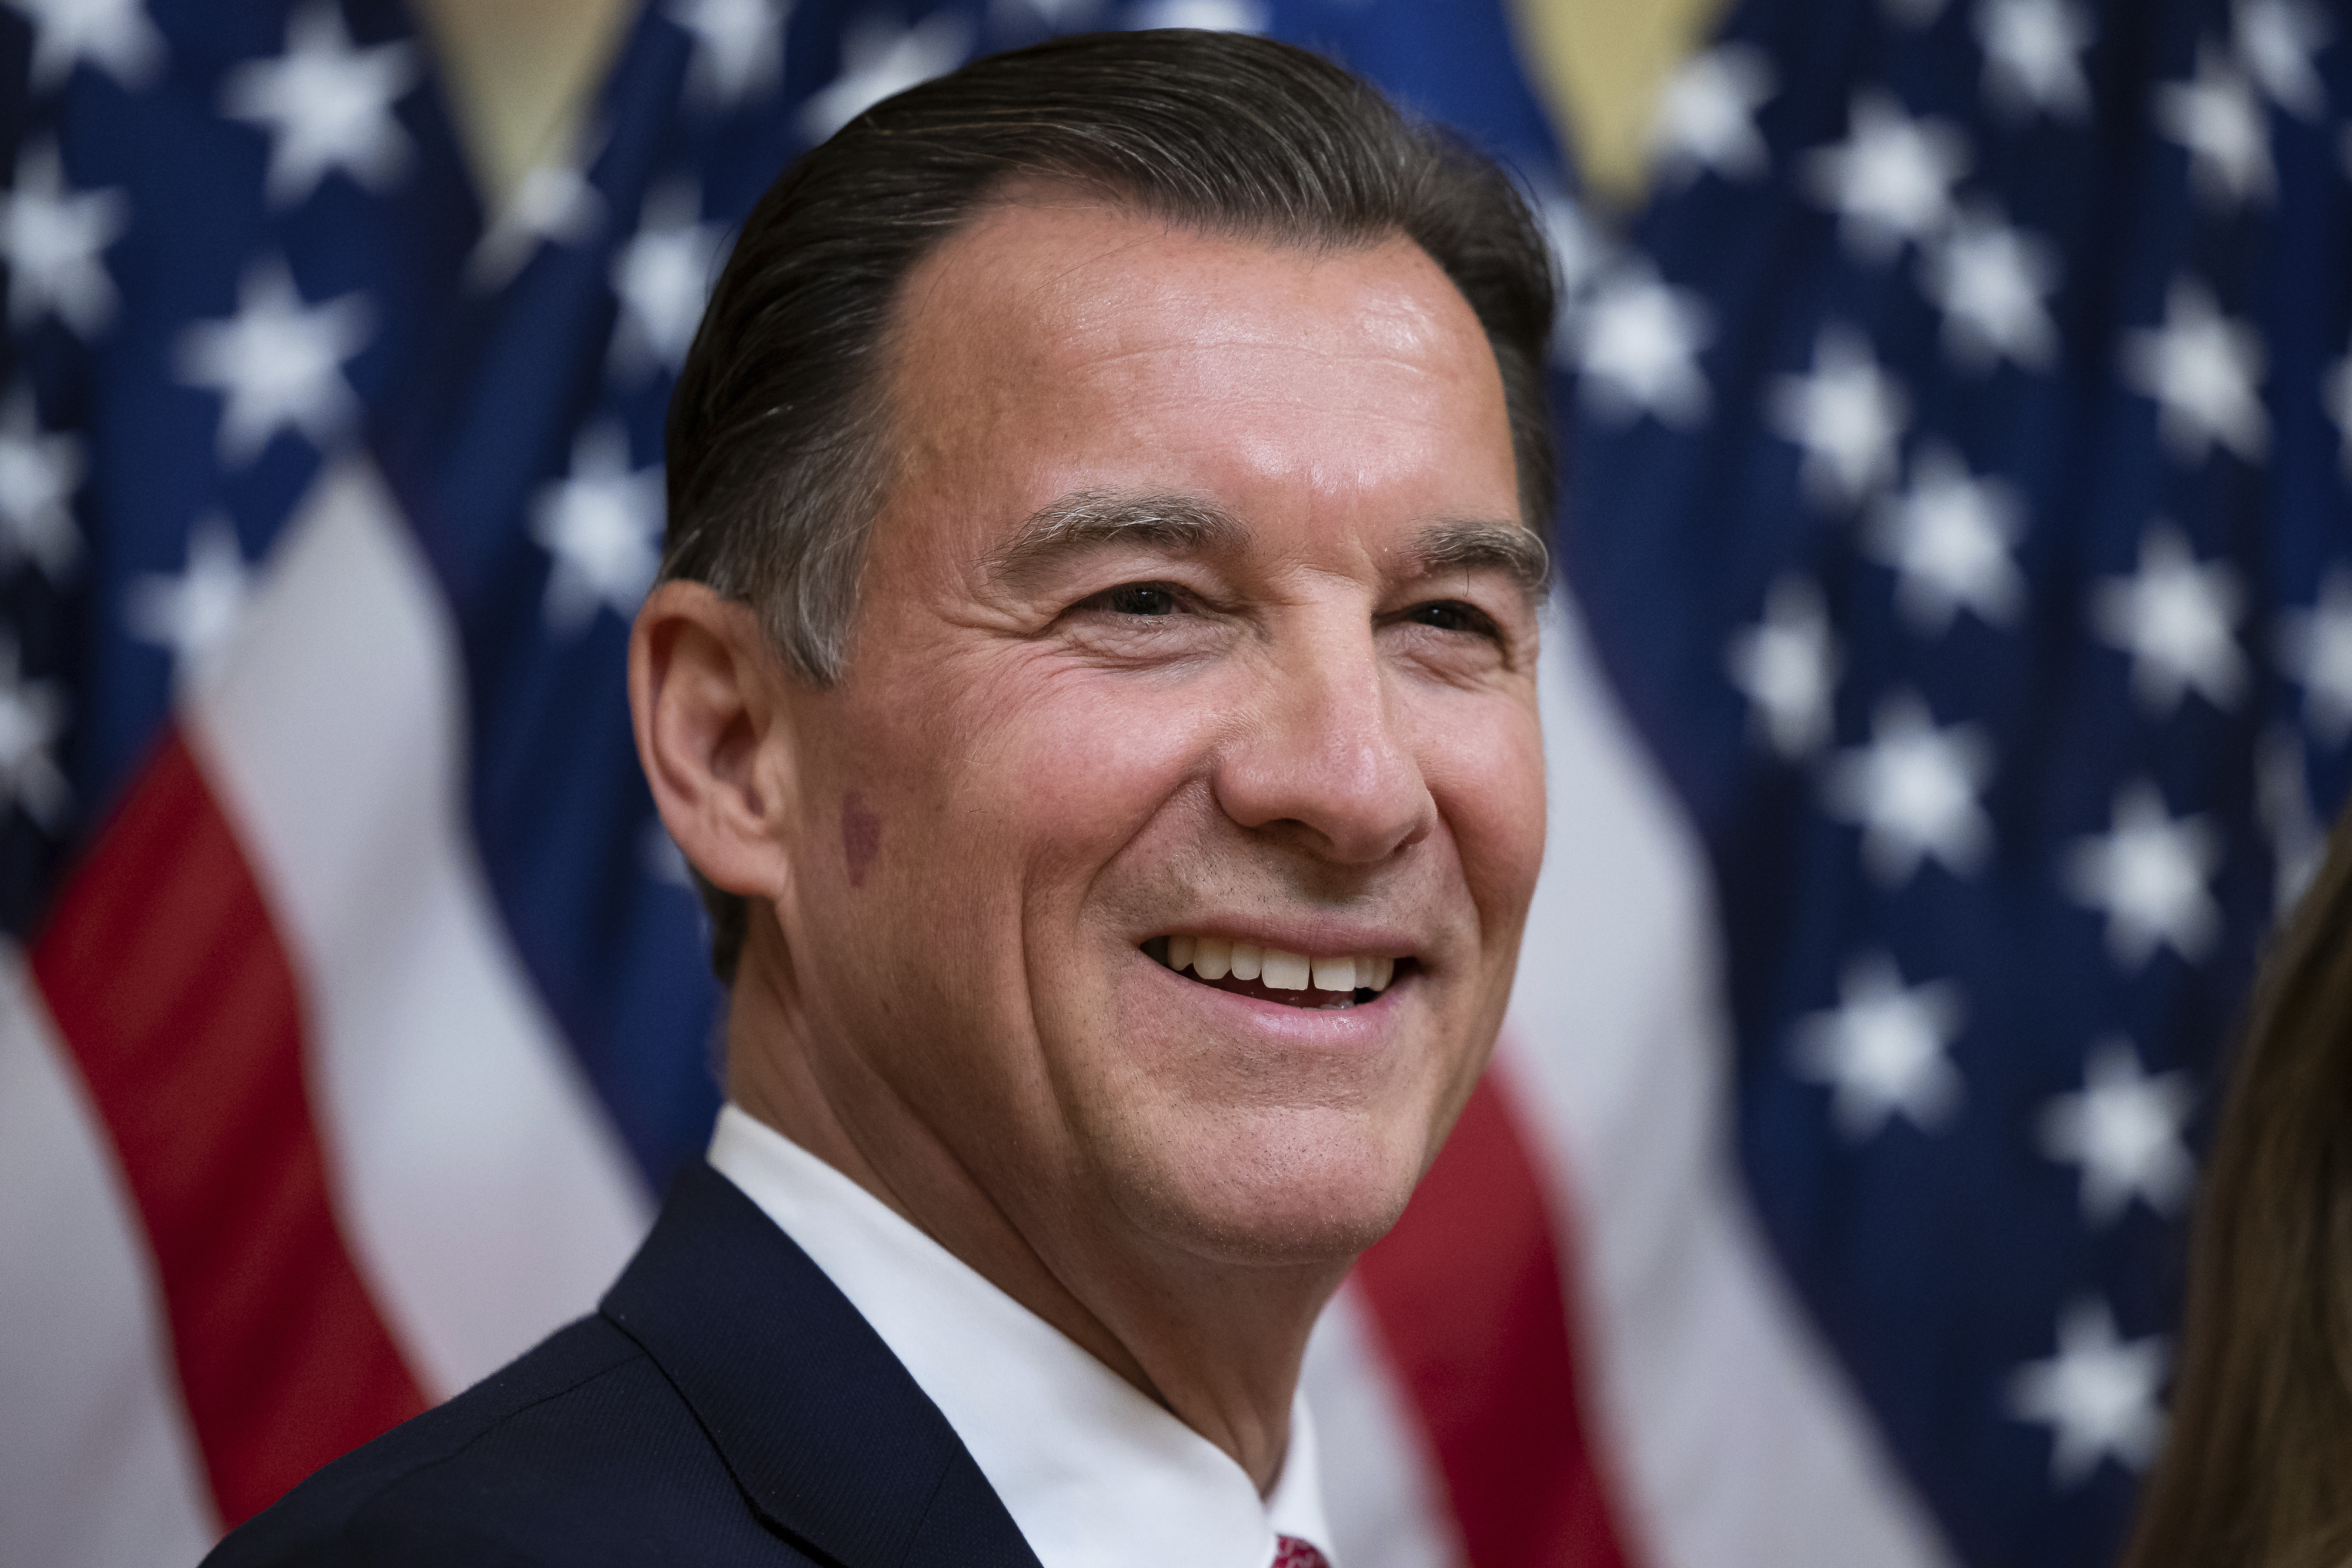 suozzi has advice for biden, democrats after special election win